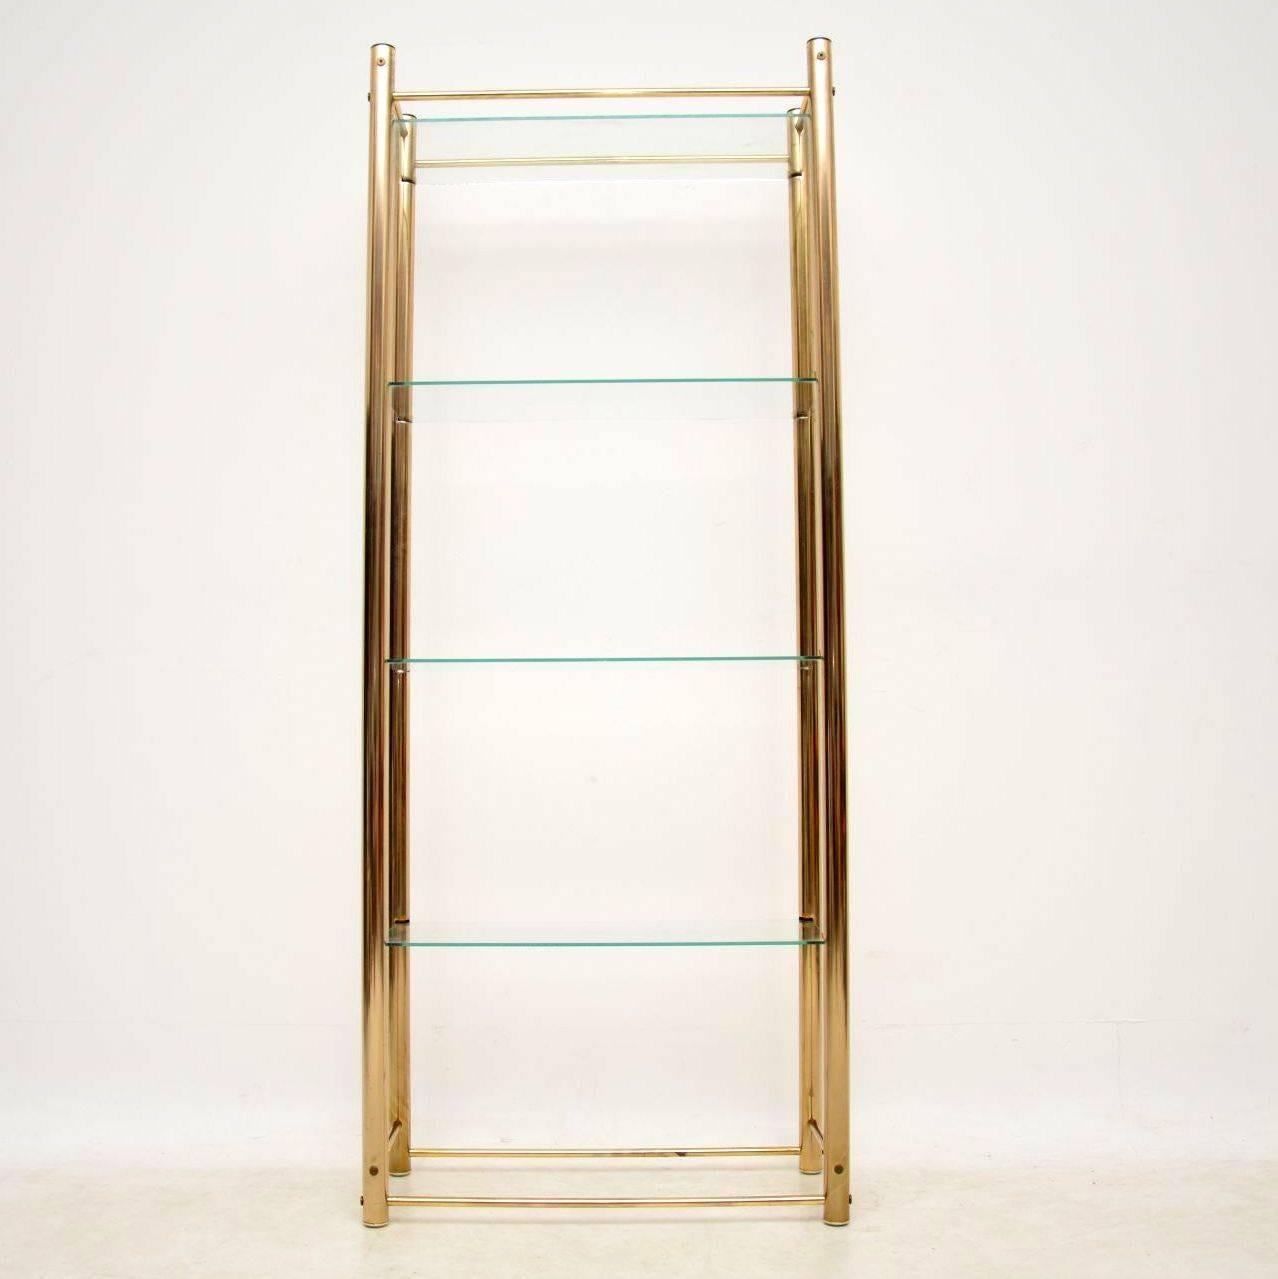 A stylish and useful vintage display stand in brass and glass, this dates from the 1960s-1970s. It’s in very good condition for it’s age, with only some very minor surface wear here and there on the brass frame. The clear glass shelves are in good